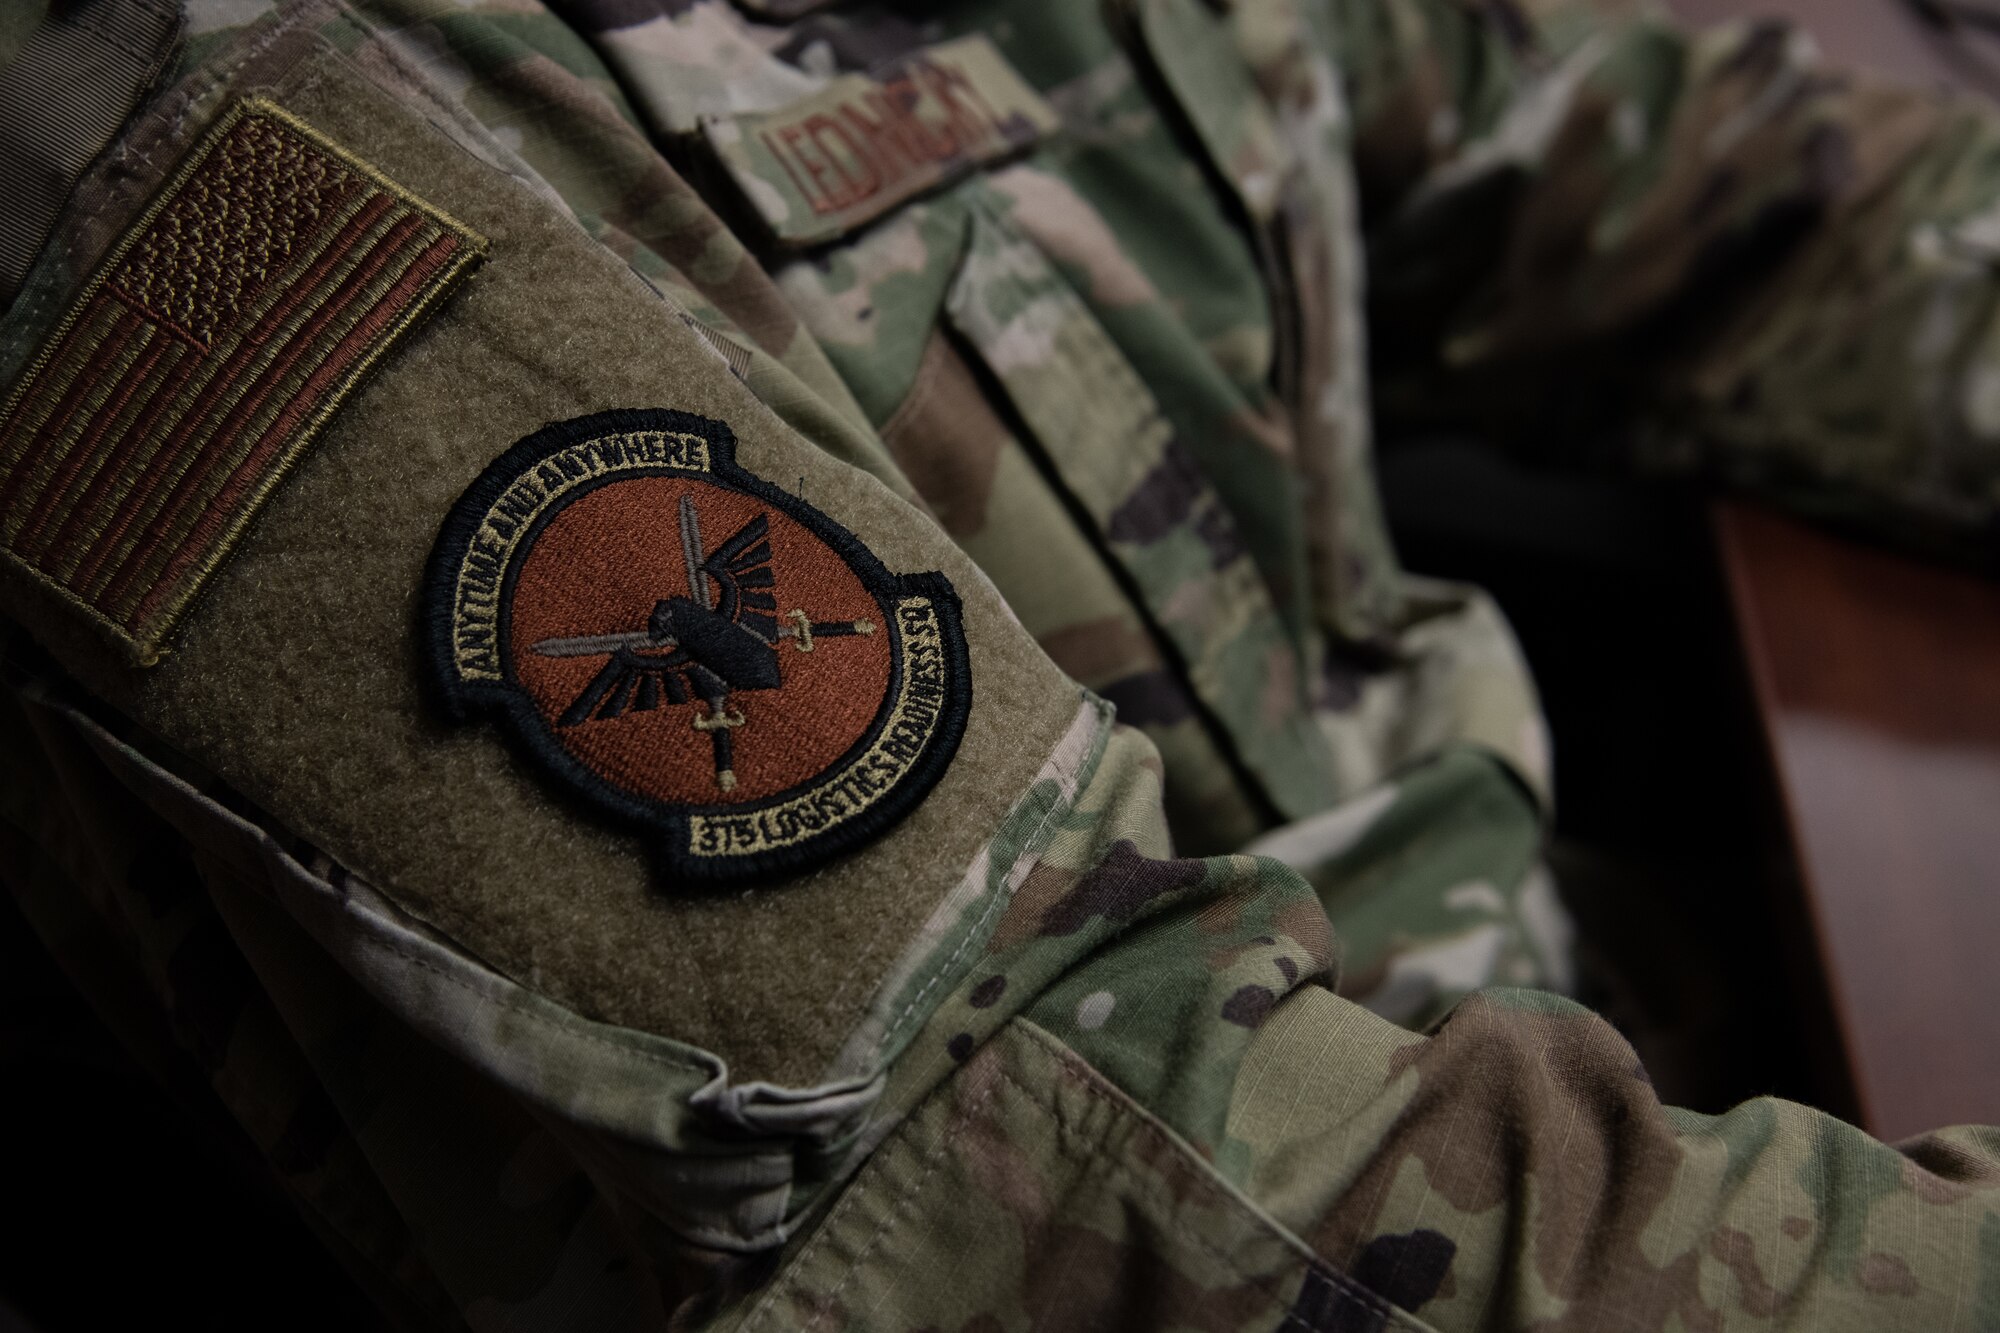 A 375th Logistics Readiness Squadron patch affixed to the uniform of Airman 1st Class Kyle Lednicky, 375th Logistics Readiness Squadron logistics planner, on Scott Air Force Base, Ill., April 2, 2021. The 375h LRS provides logistic support to Scott AFB and tenant units to enable rapid global mobility. (U.S. Air Force photo by Shannon Moorehead)